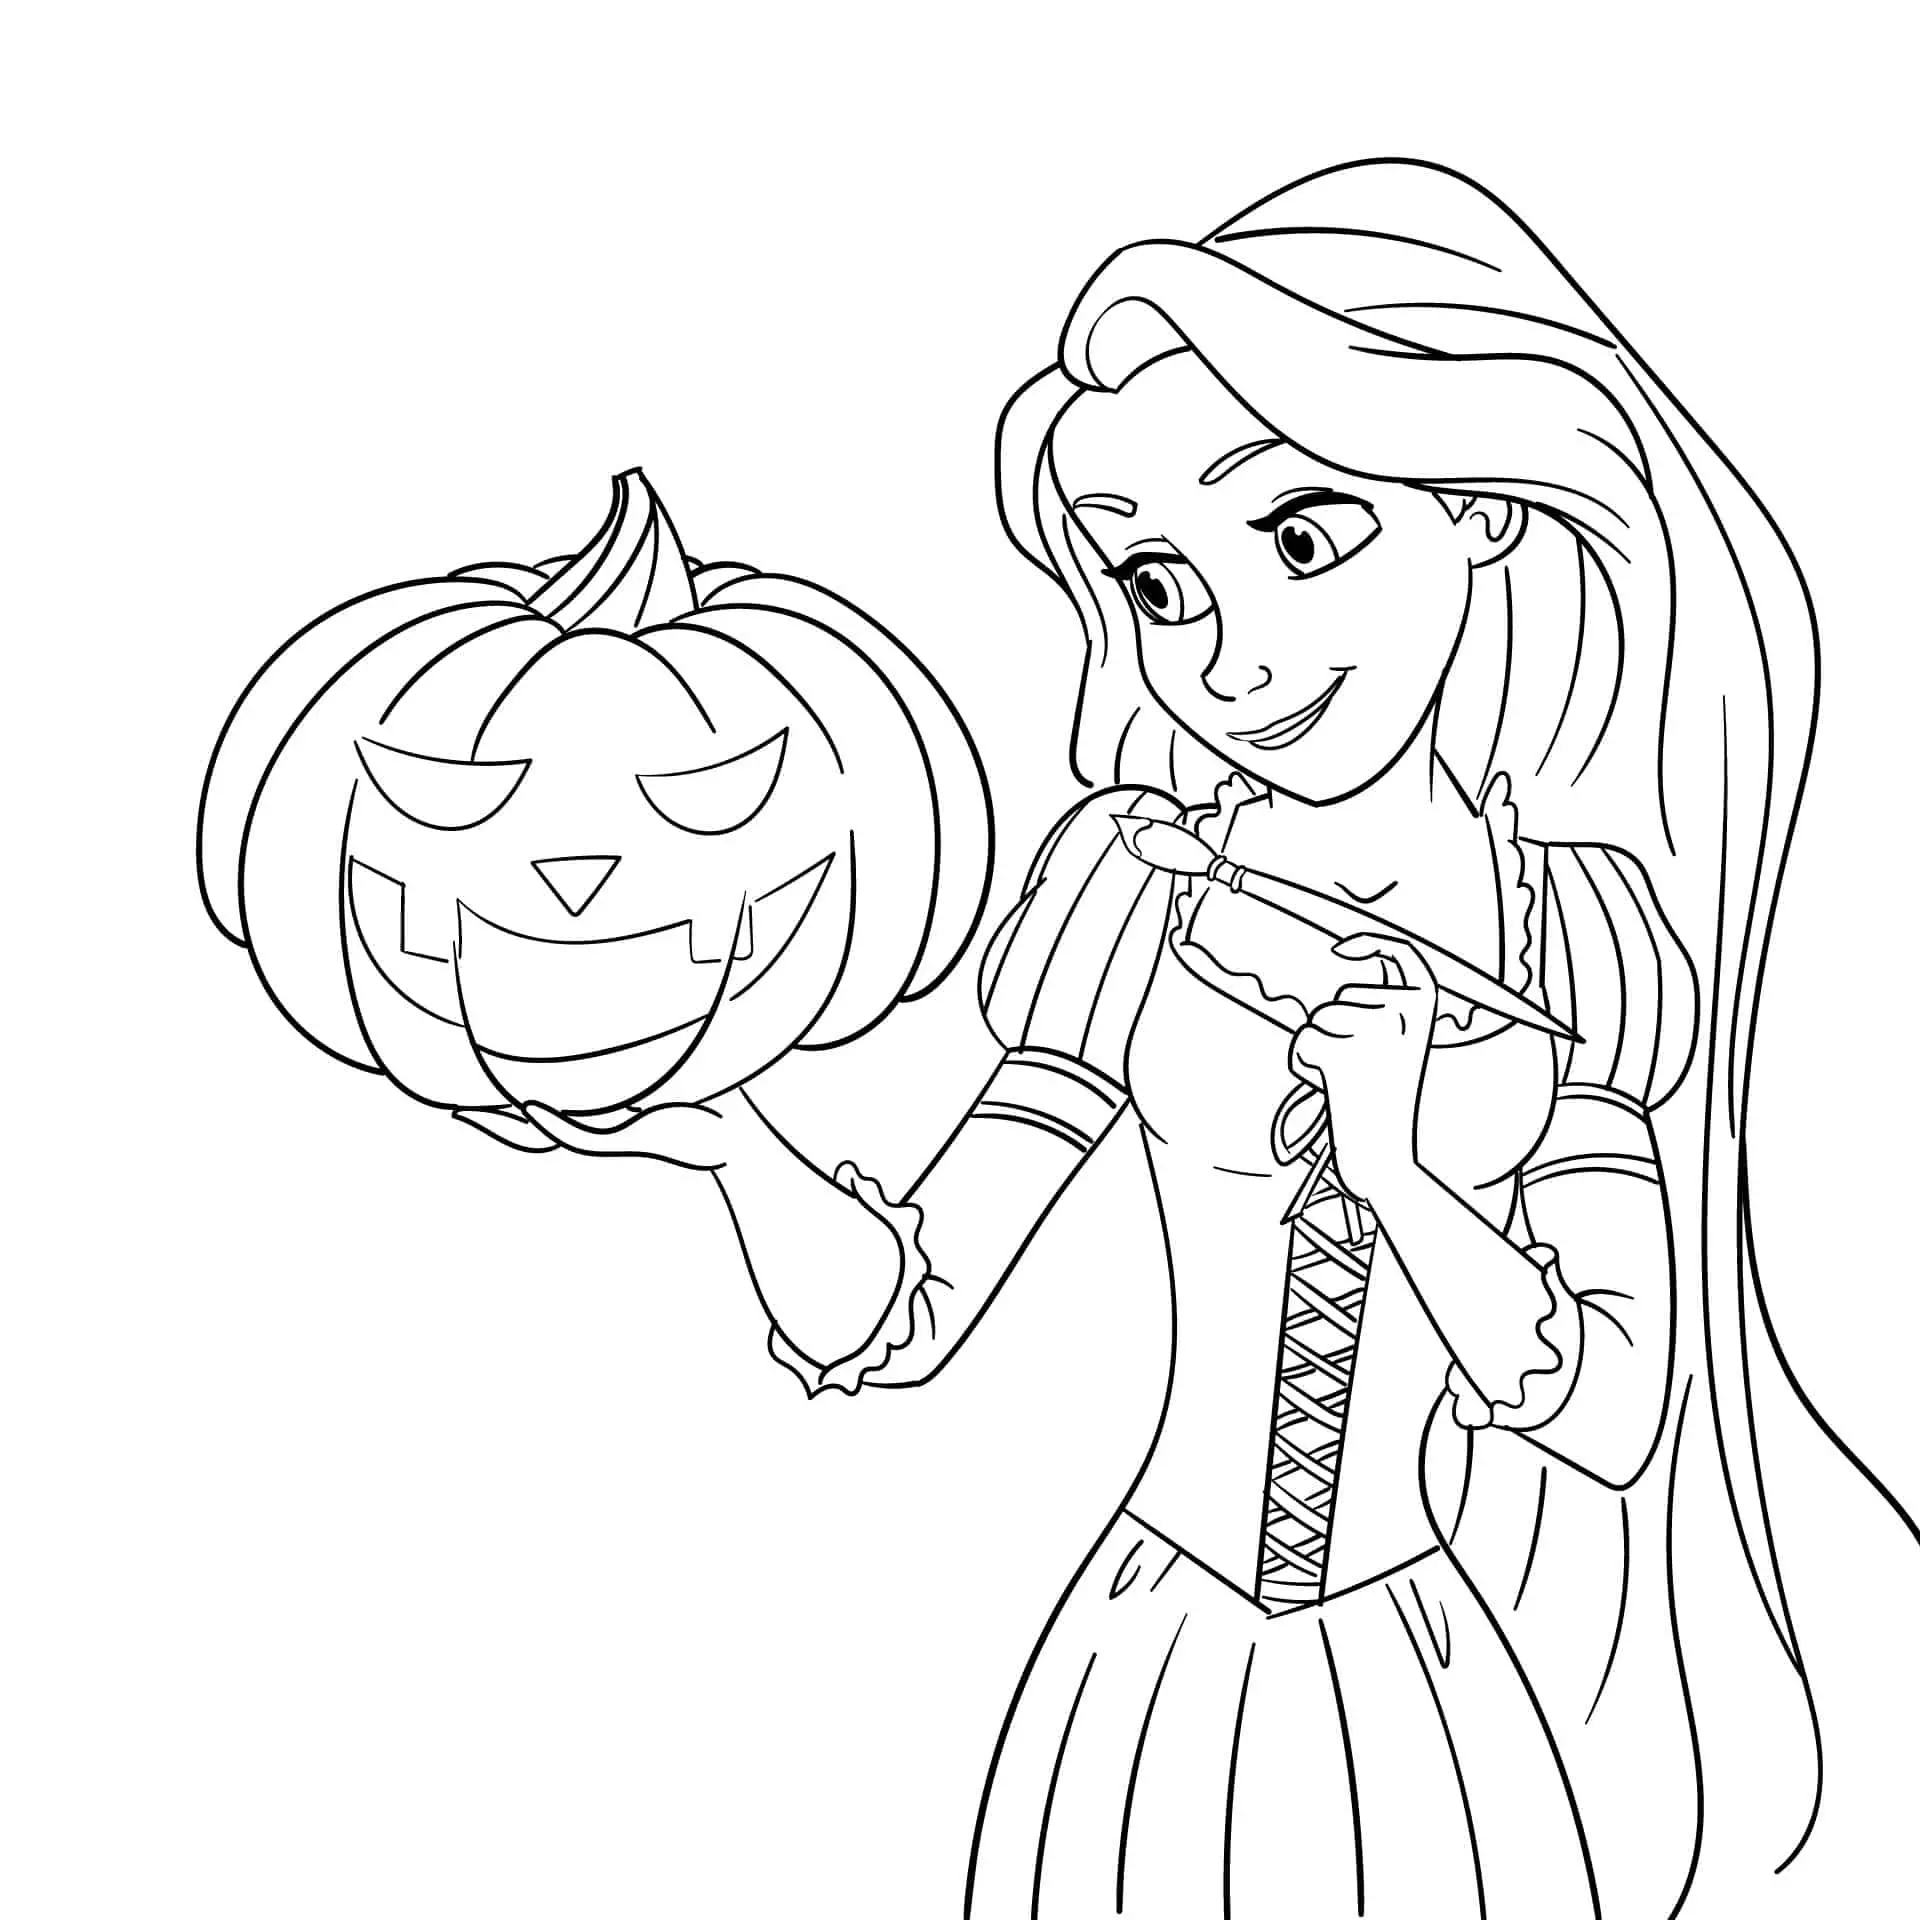 disney-halloween-coloring-pages-my-amusing-adventures